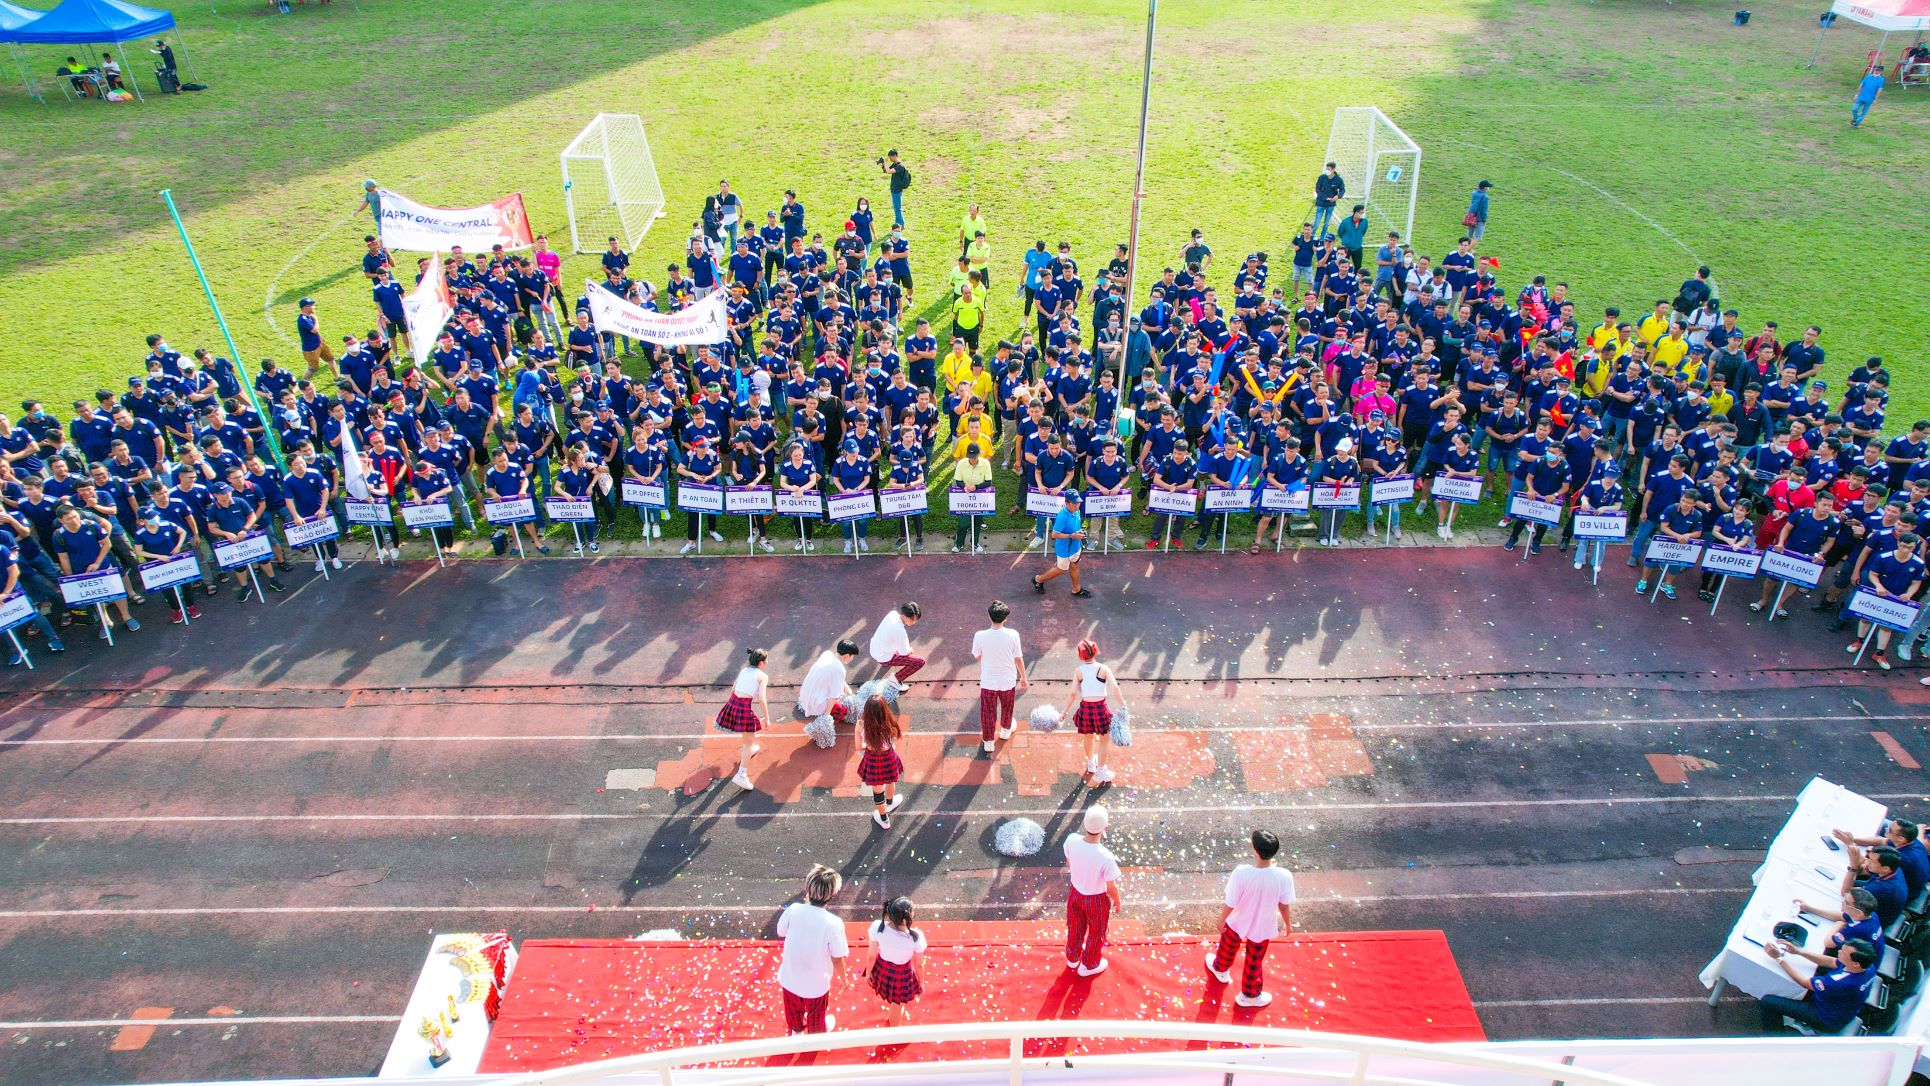 CENTRAL SPORTS DAY 2022 OPENING CEREMONY - Central Cons